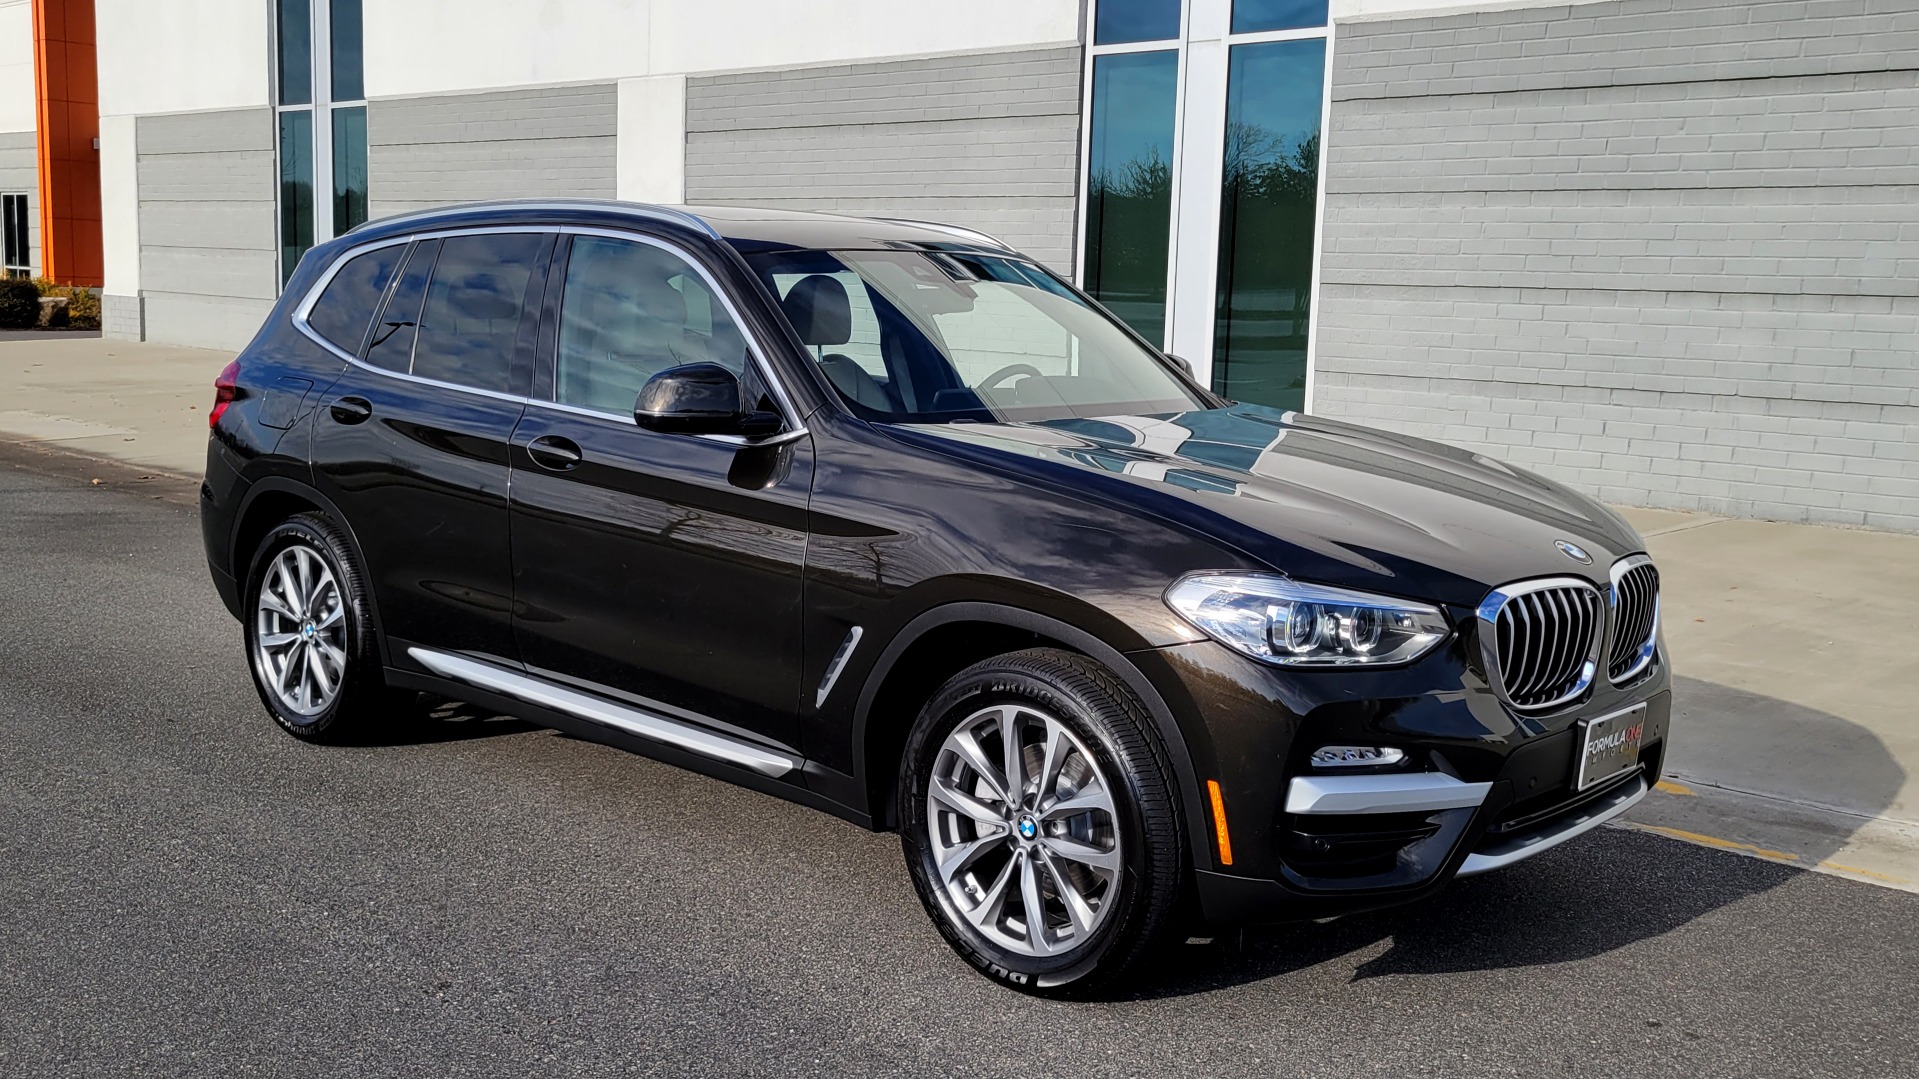 Used 2019 BMW X3 XDRIVE30I 2.0L SUV / NAV / PANO-ROOF / DRVR ASST / HTD STS / REARVIEW for sale Sold at Formula Imports in Charlotte NC 28227 6